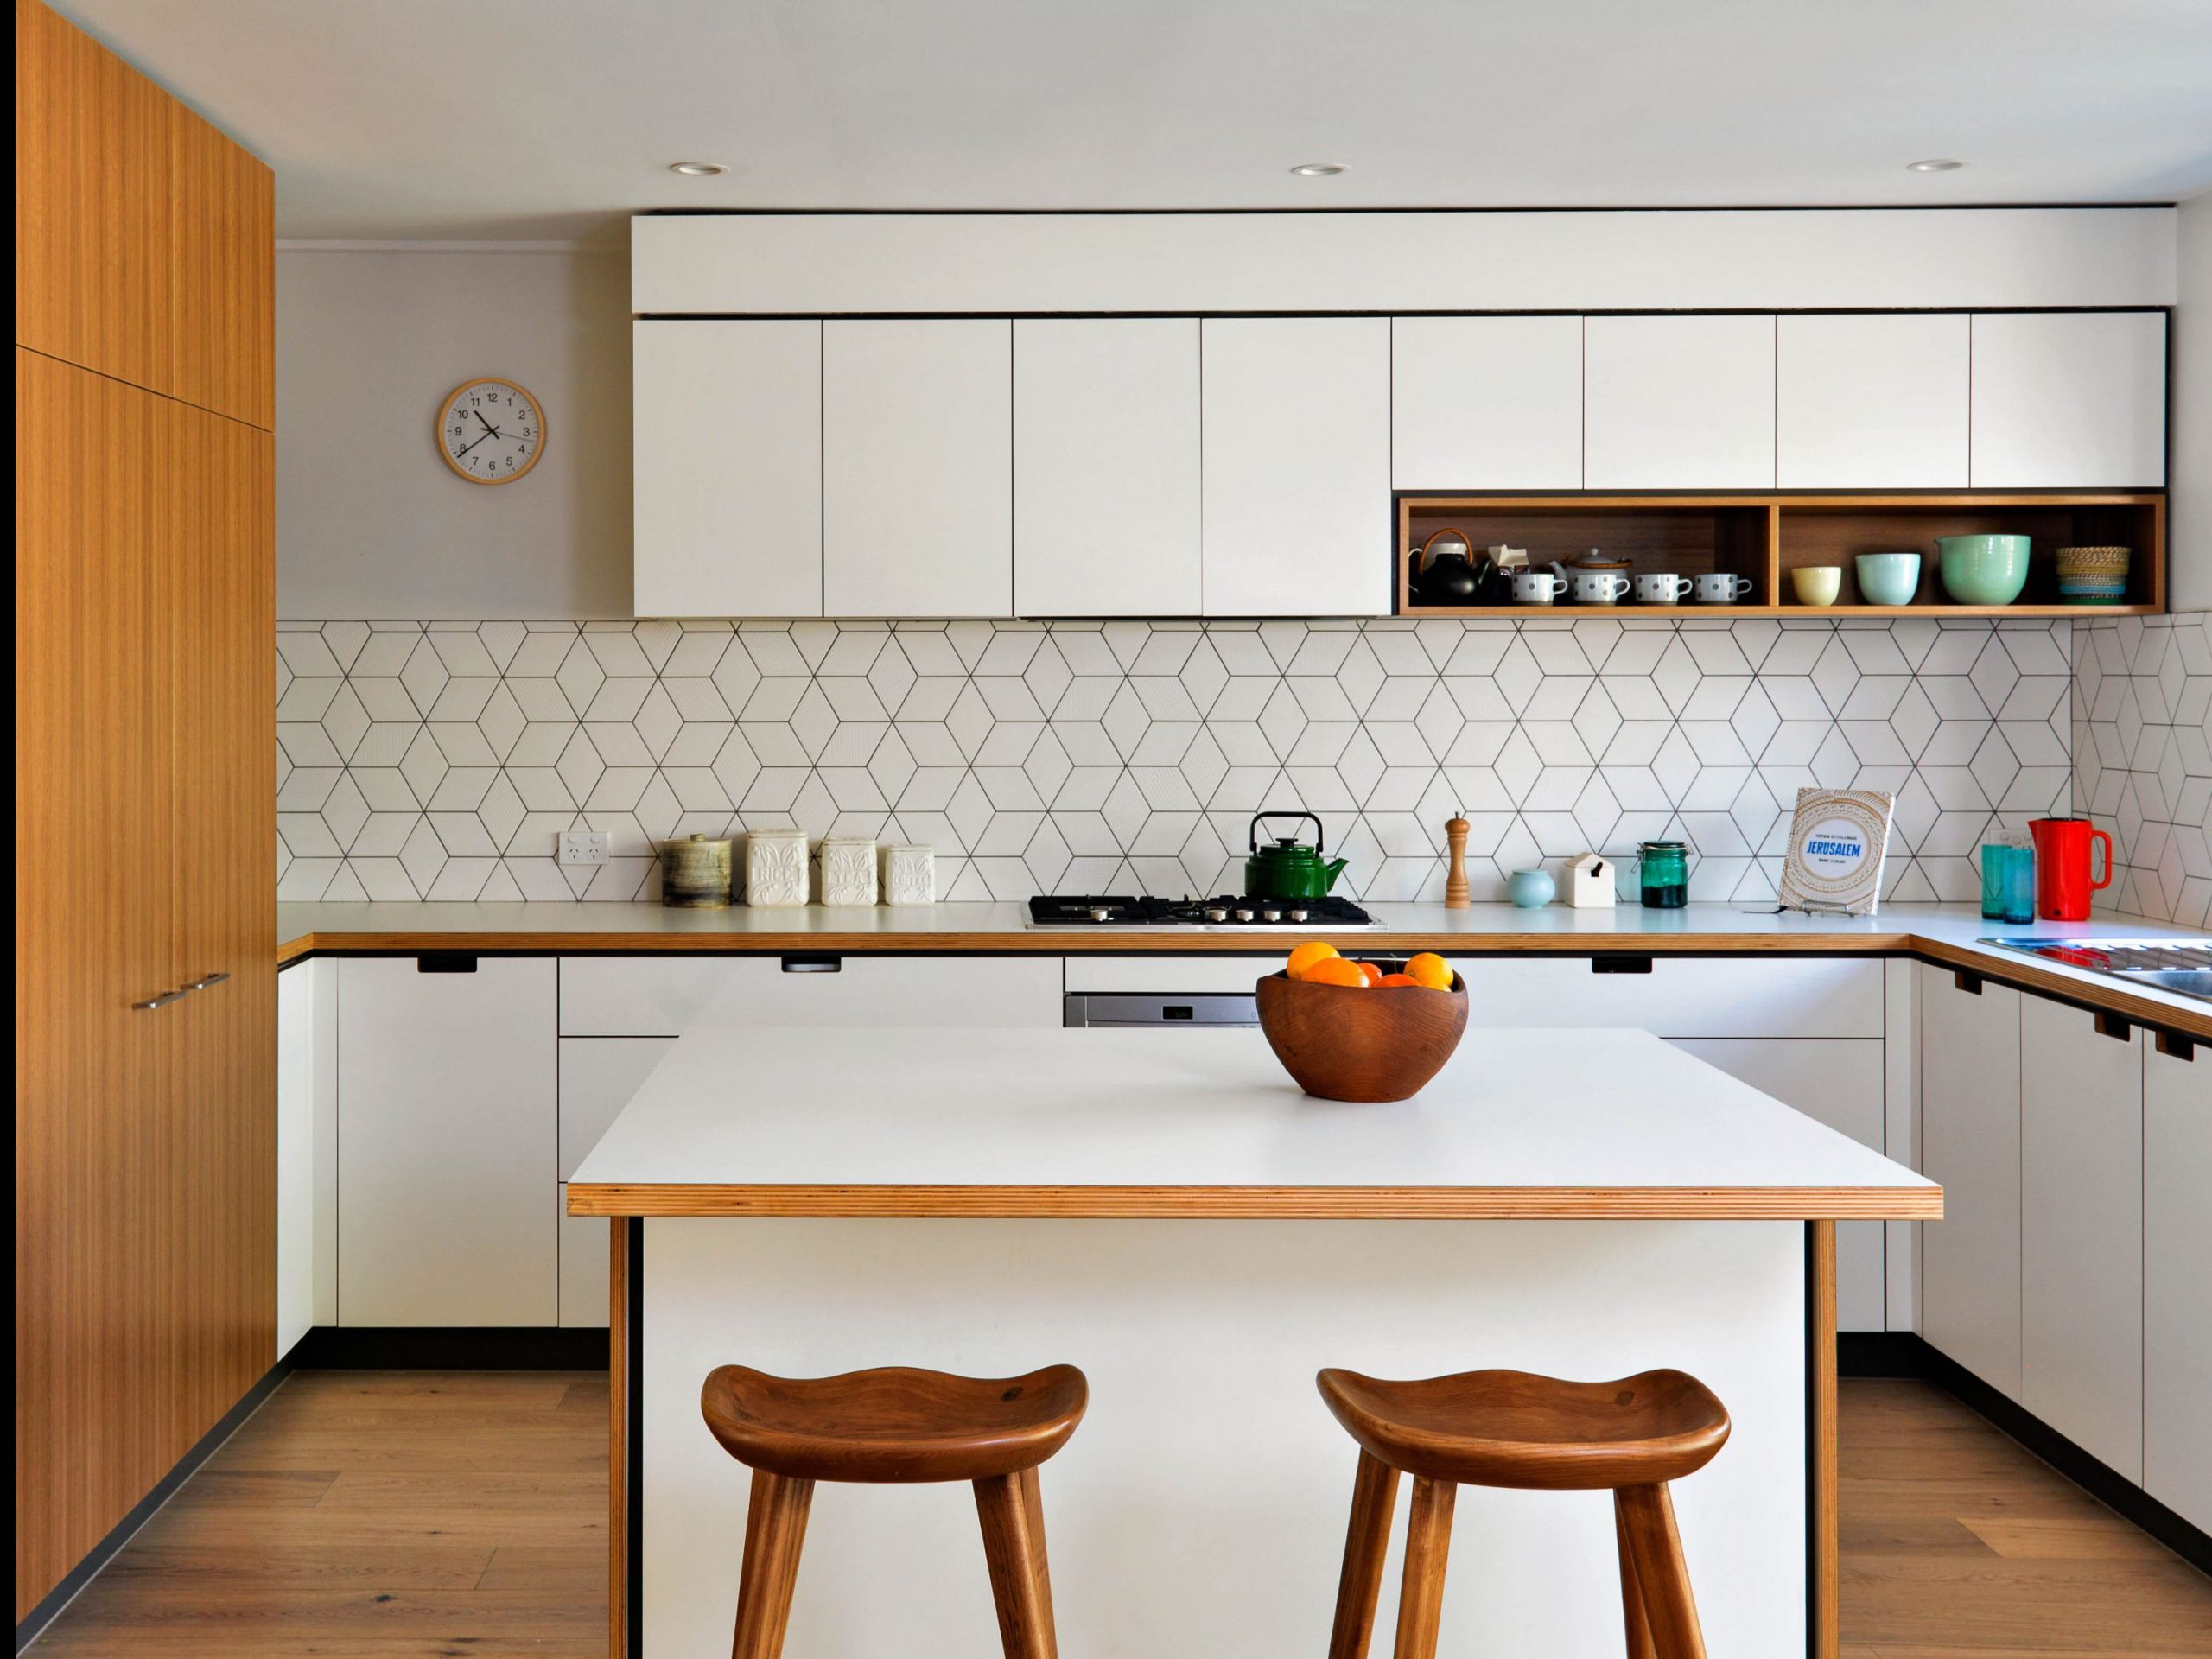 Midcentury Modern Kitchen
 How to Create a mid century inspired kitchen The